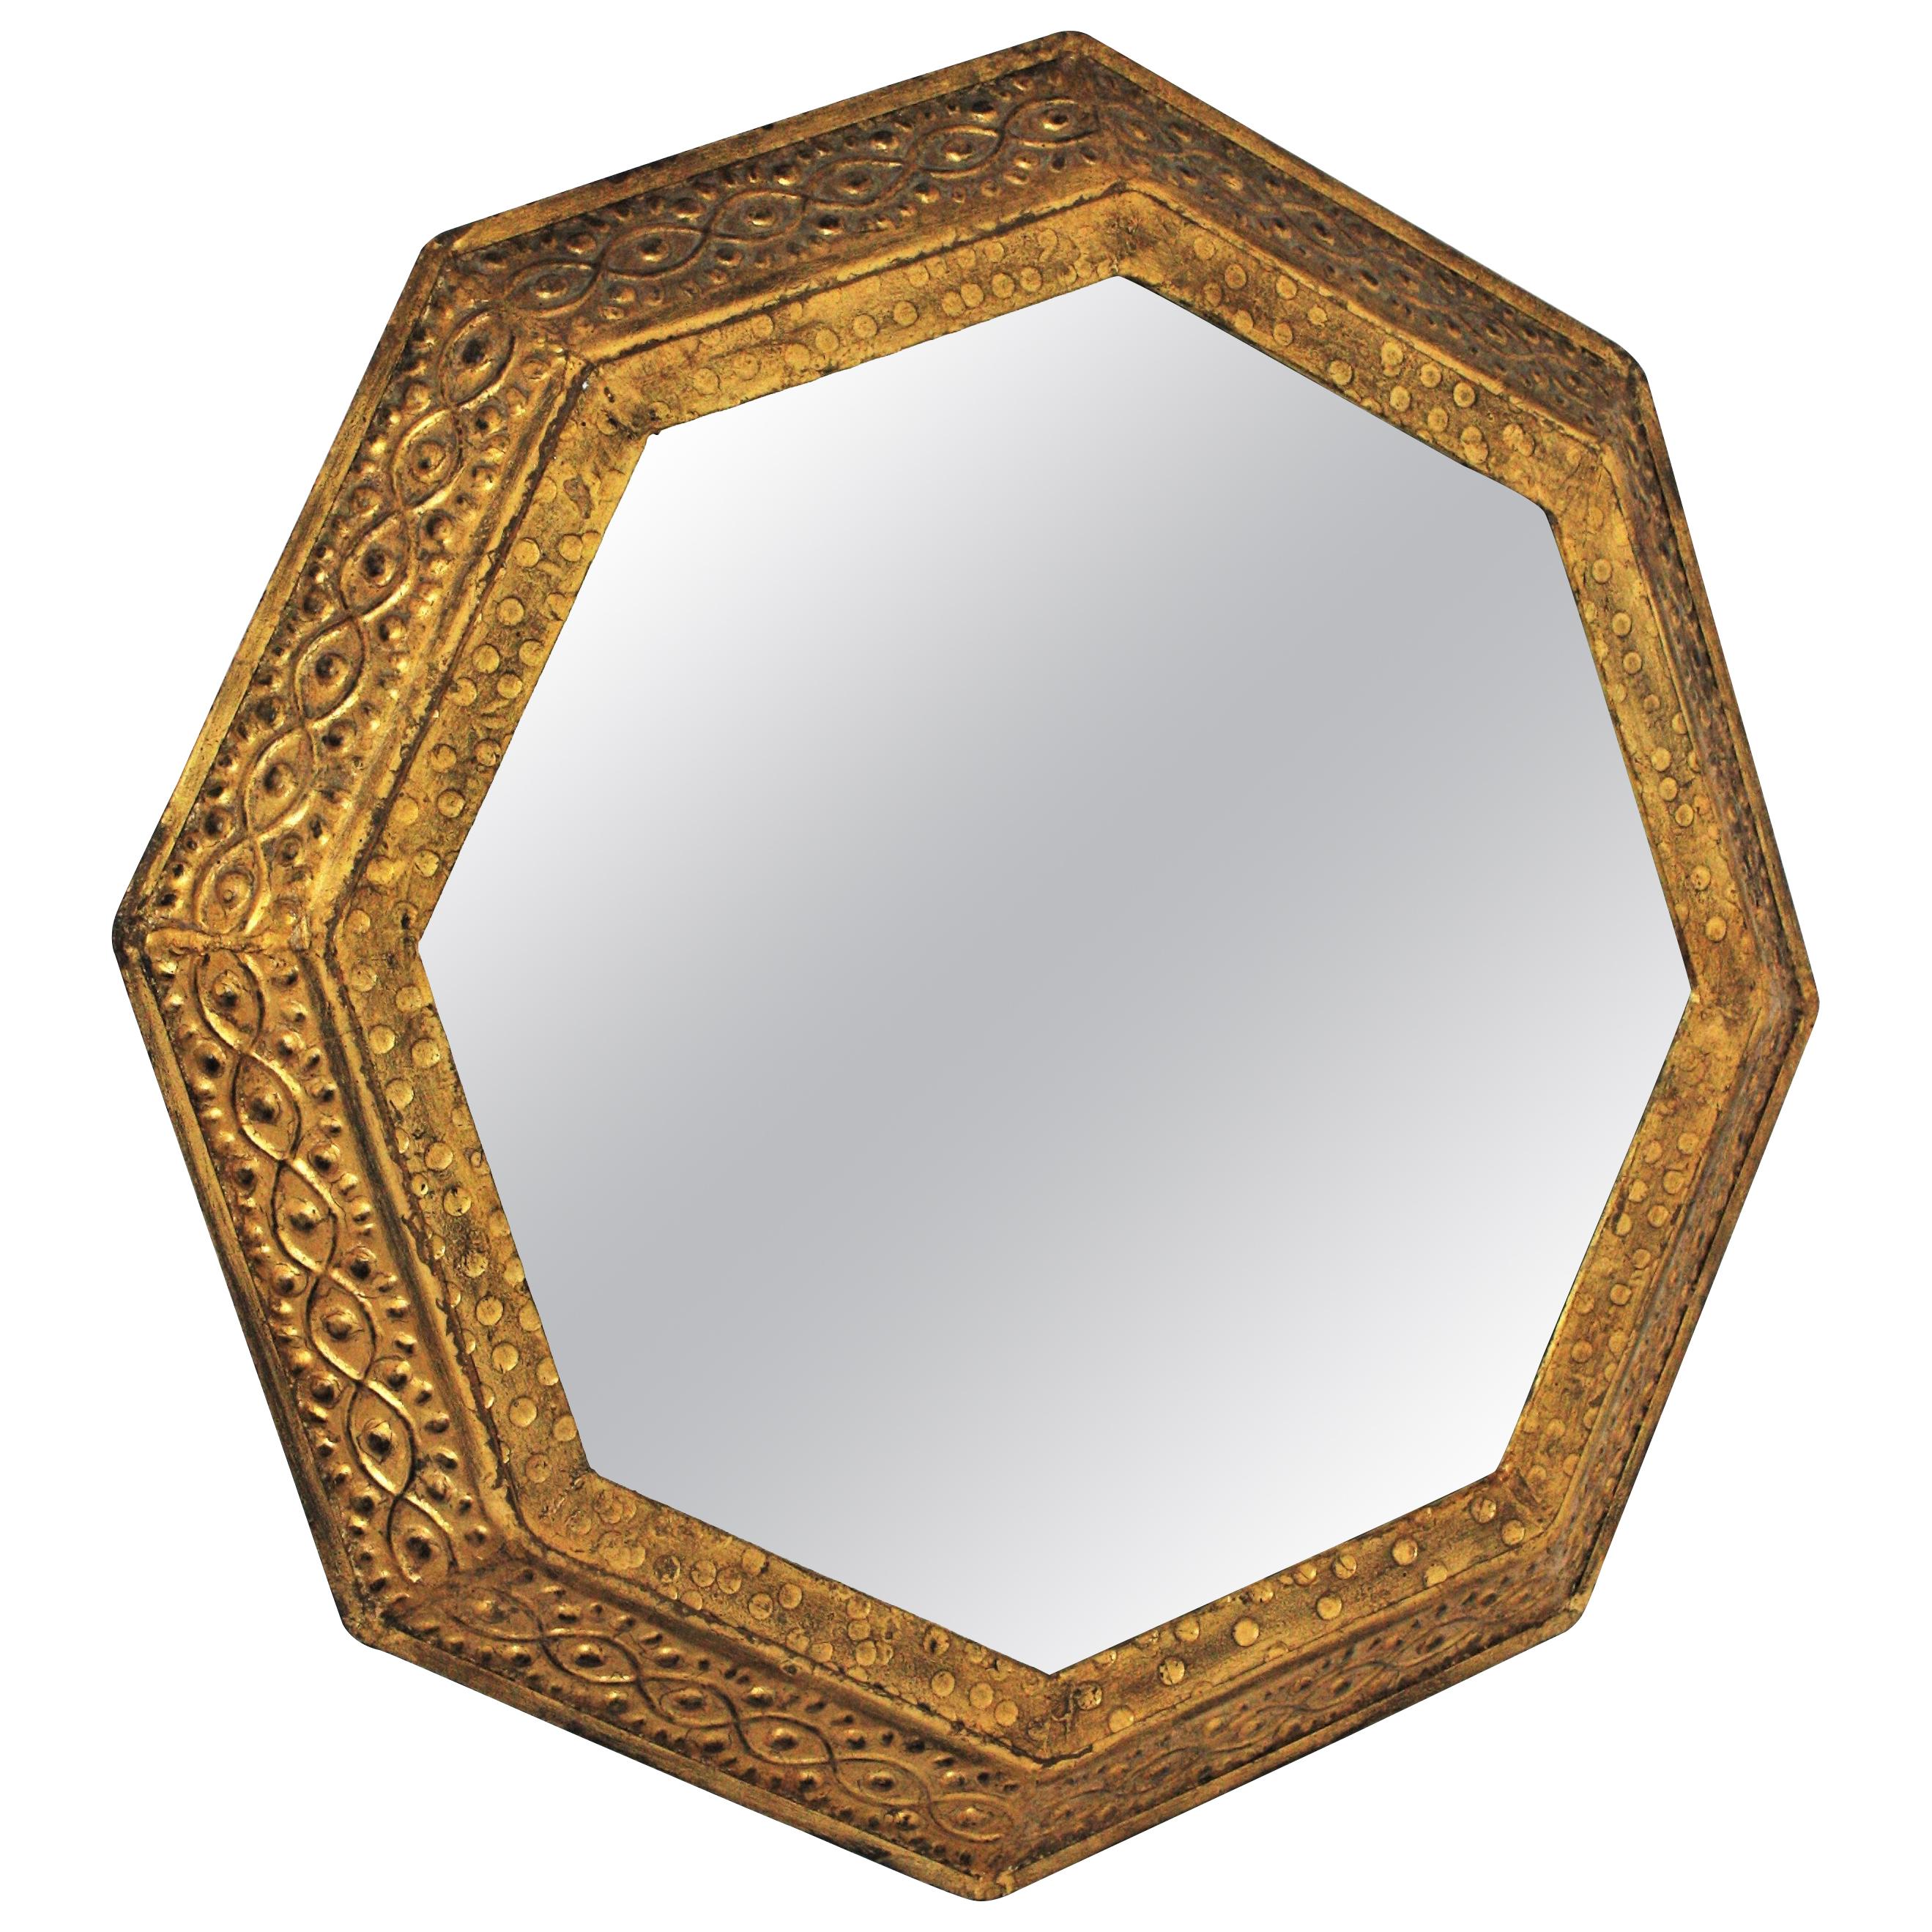 An elegant gold leaf gilt wrought iron octagonal mirror with classical patterns on the frame. Manufactured by Ferro-Art. Spain, 1950s.
This eye-catching mirror features a frame in octagon shape combinining Brutalist and Midcentury accents. It has